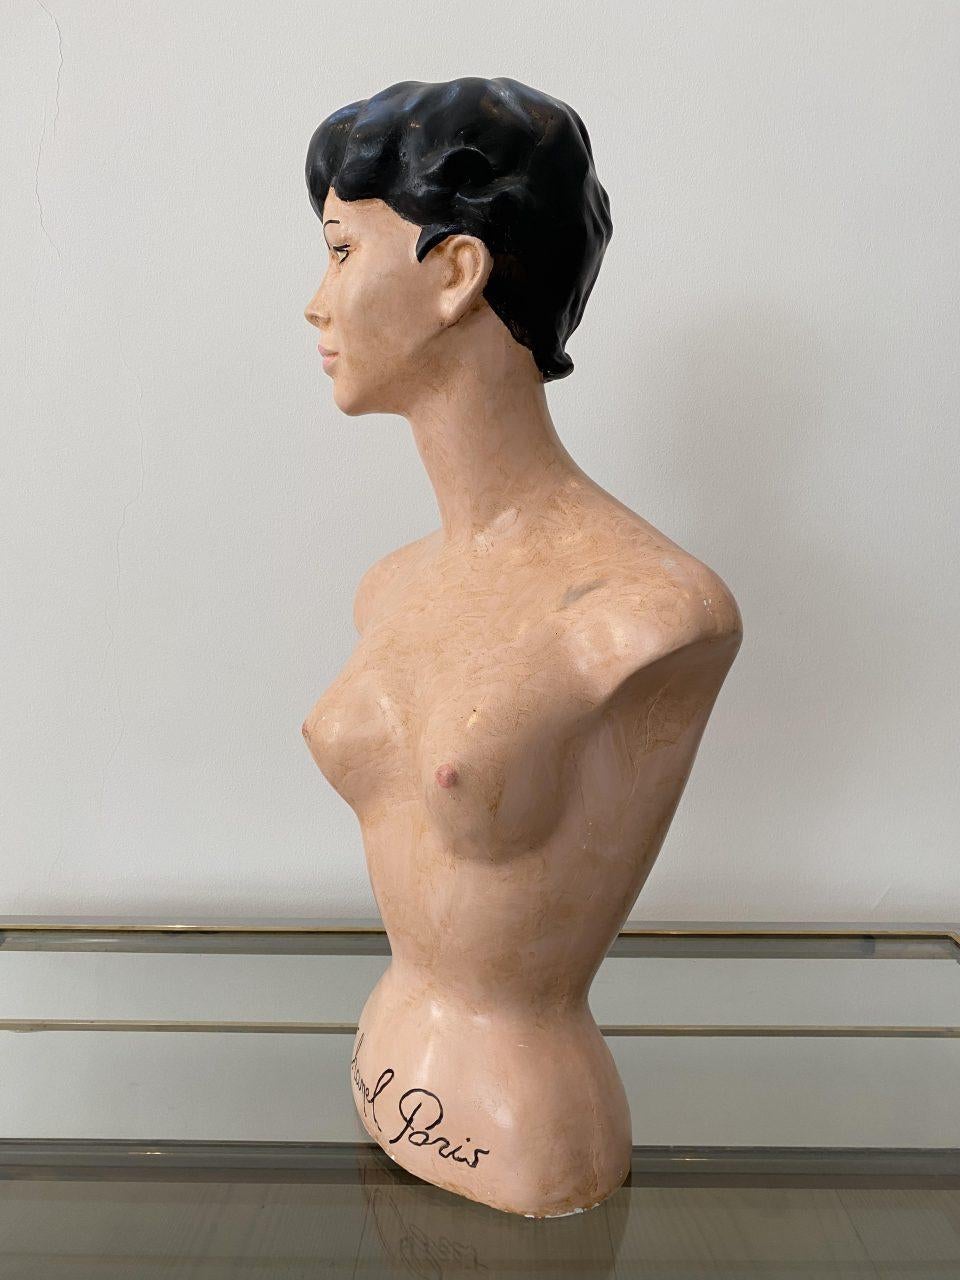 Seductive and naughty bust / mannequin of a young woman. Made of painted plaster and is made as a sensual and attractive femme fatale with a nice and lush bosom.

The bust was originally produced for the world-renowned French fashion house Chanel